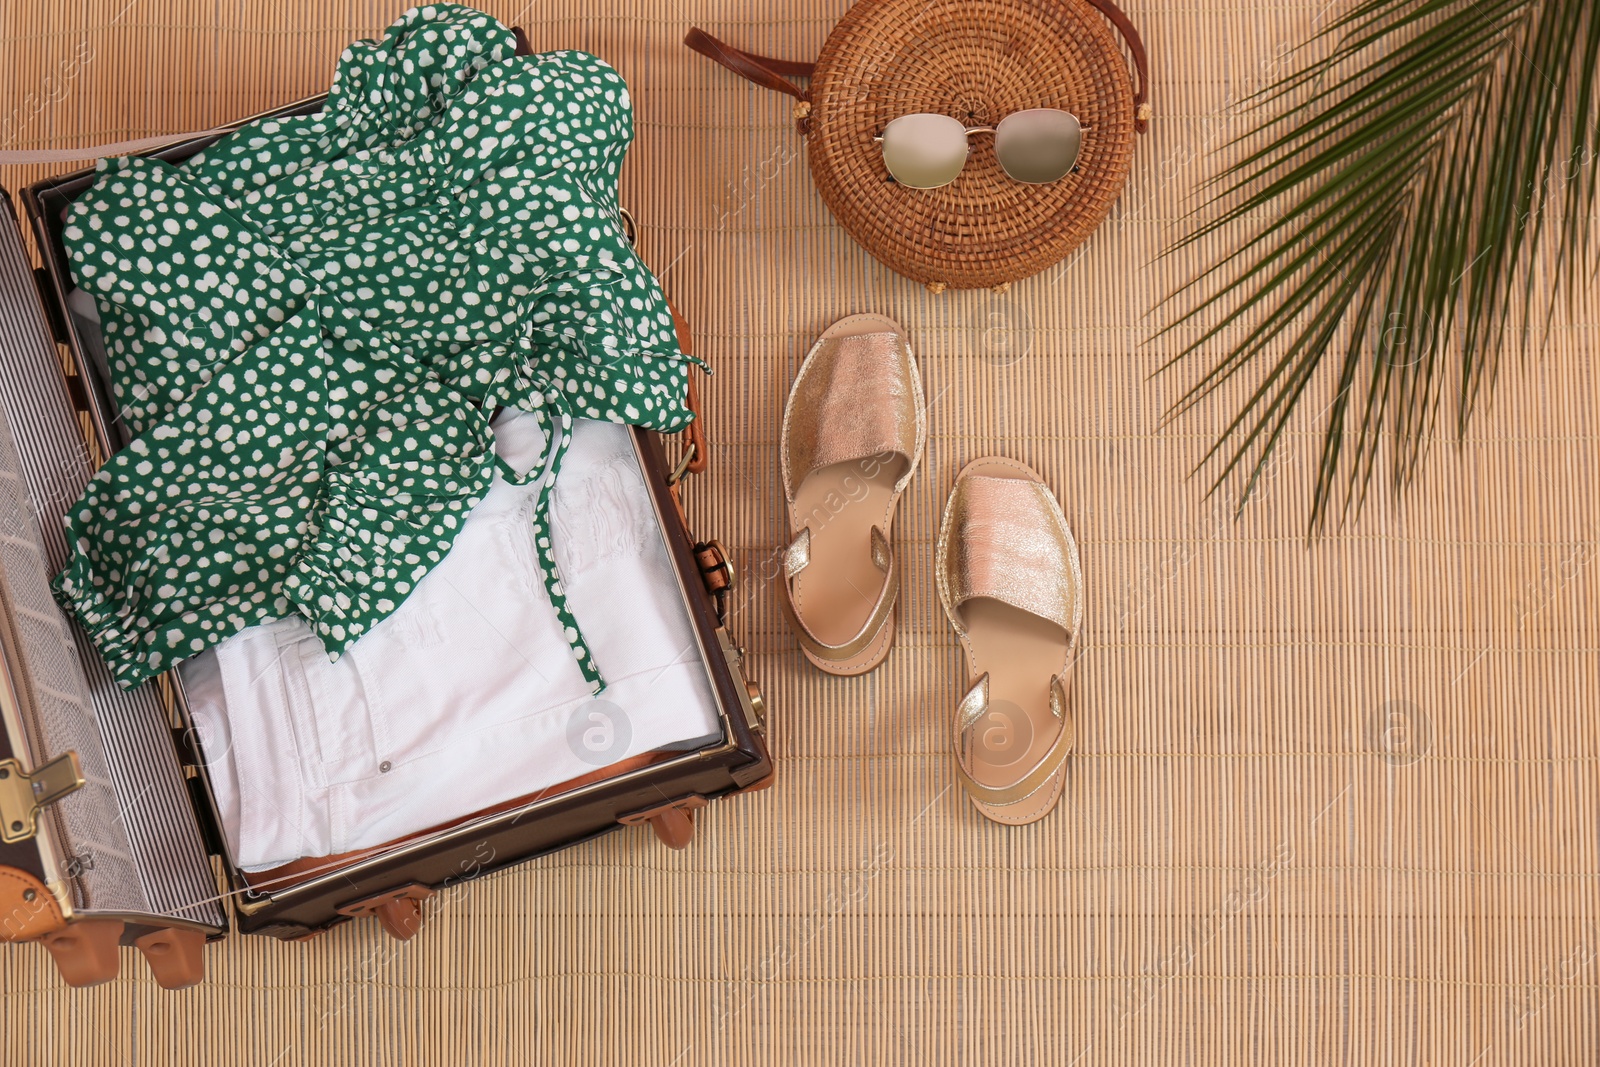 Photo of Flat lay composition with open suitcase on bamboo mat